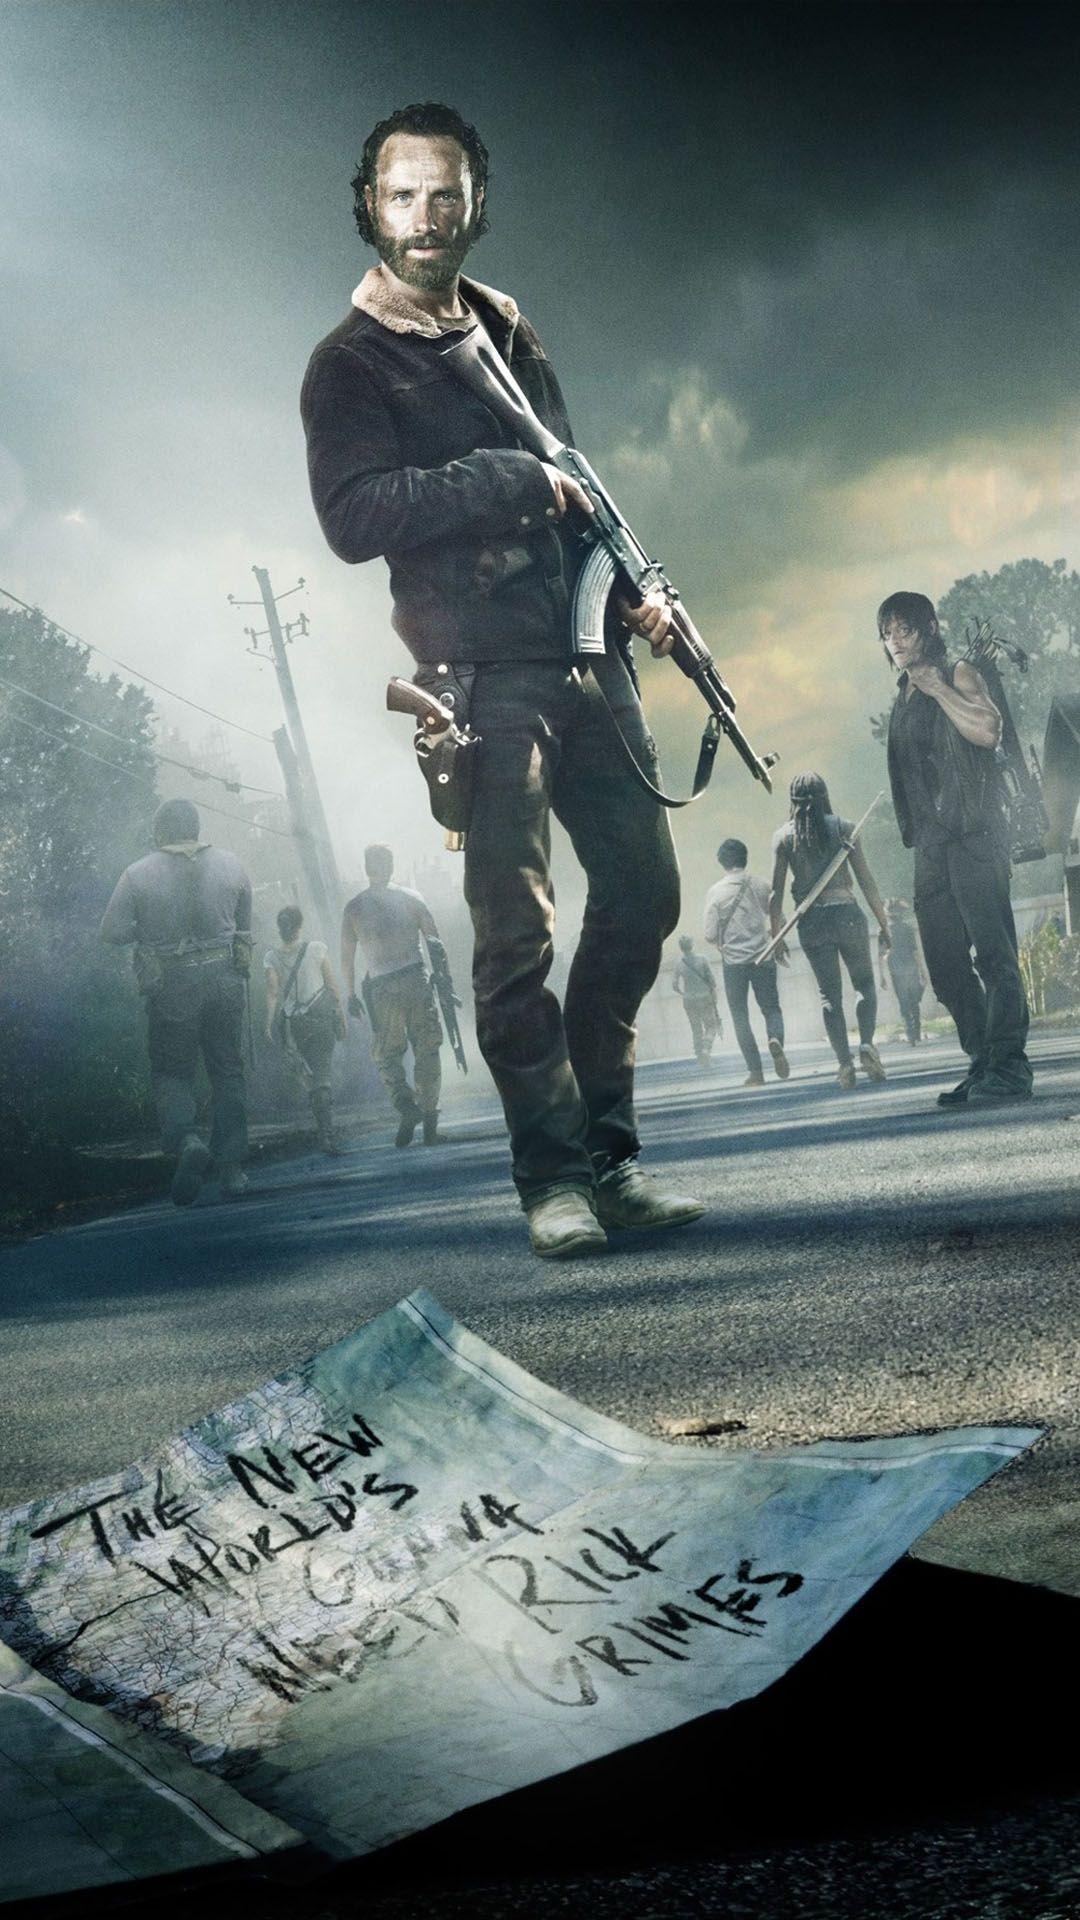 The new worlds gonna need Rick Grimes. Walking dead wallpaper